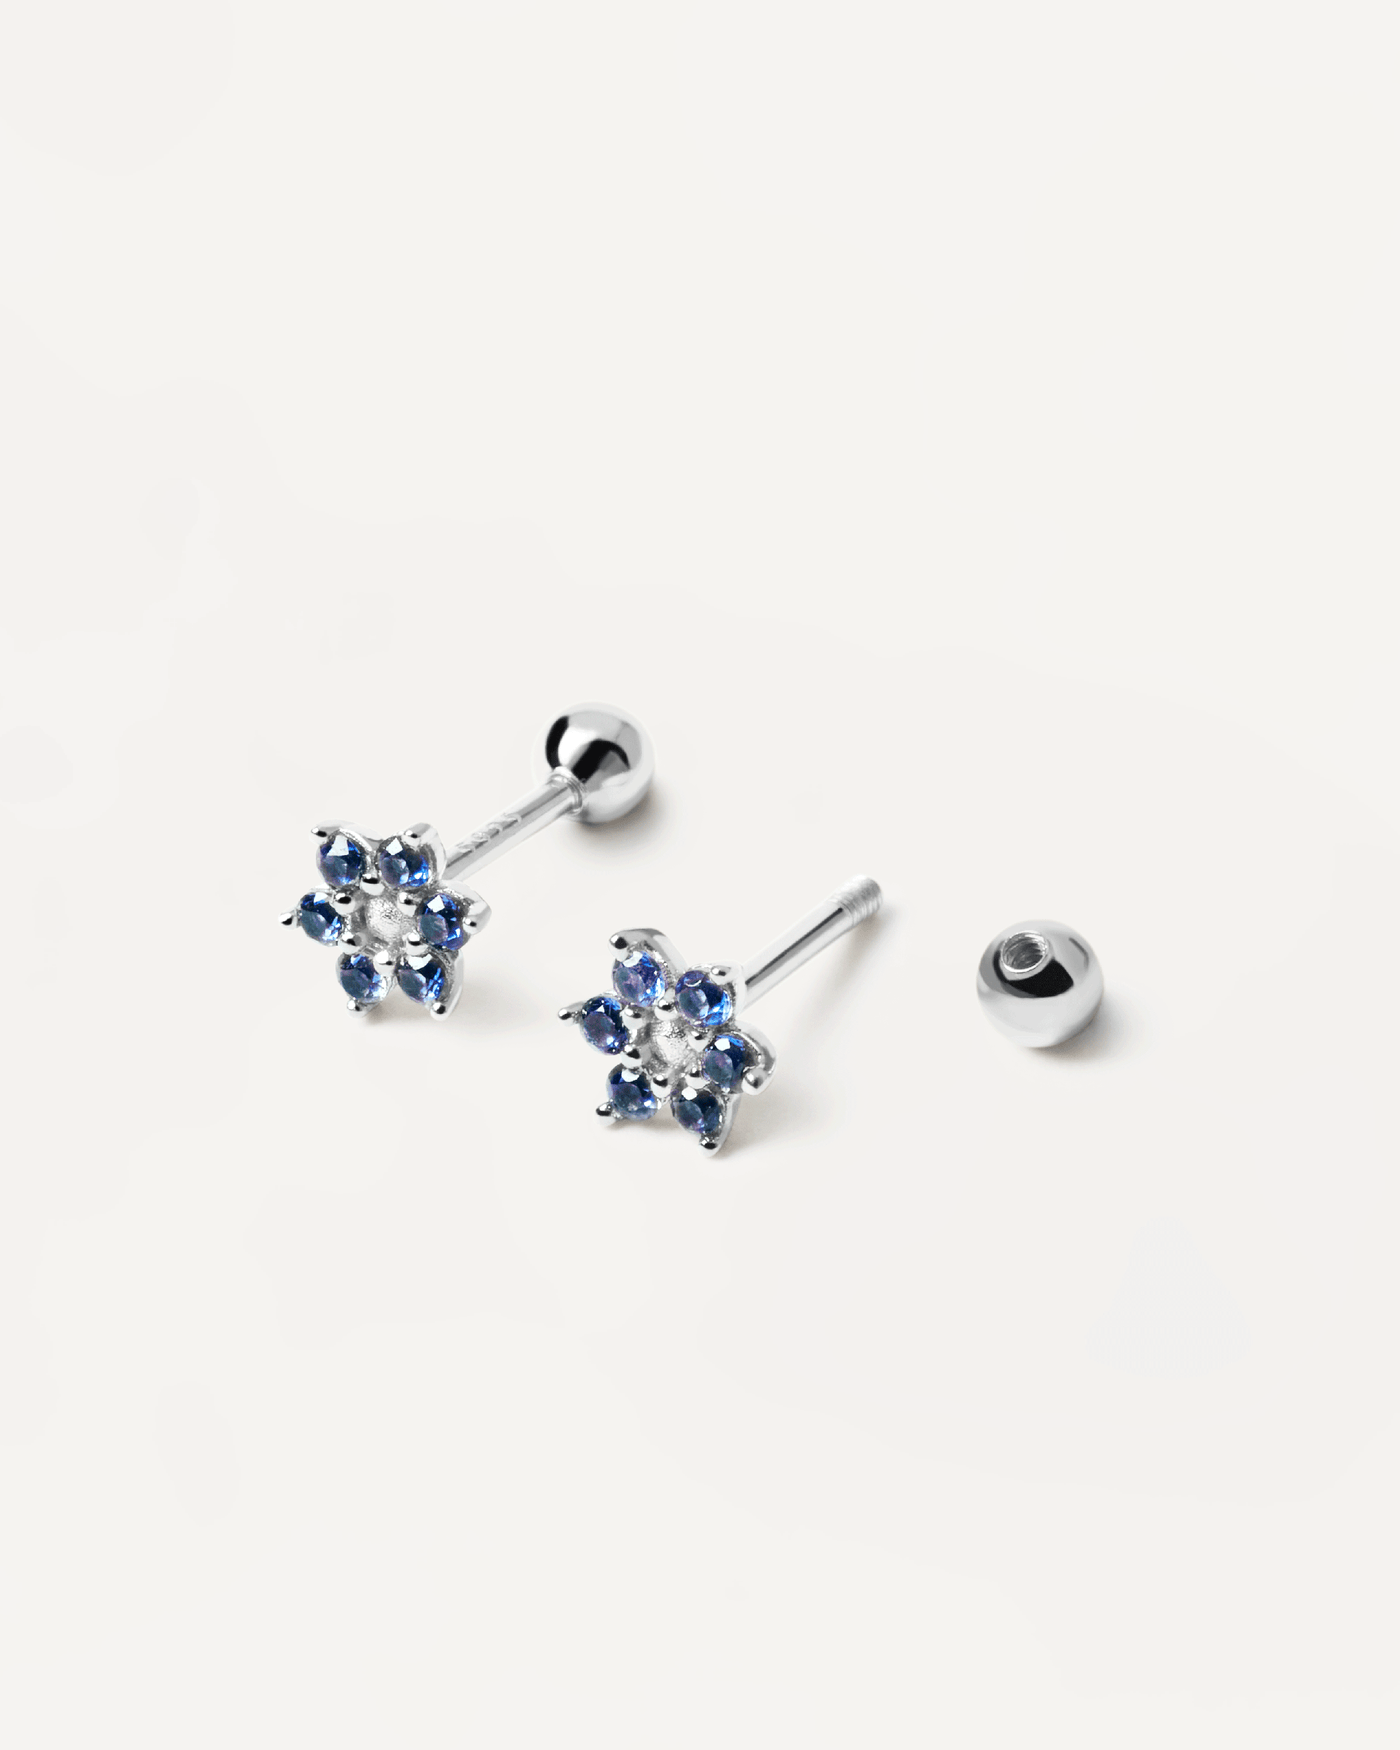 2023 Selection | Indigo Peony Silver Earrings. Get the latest arrival from PDPAOLA. Place your order safely and get this Best Seller. Free Shipping over 40€